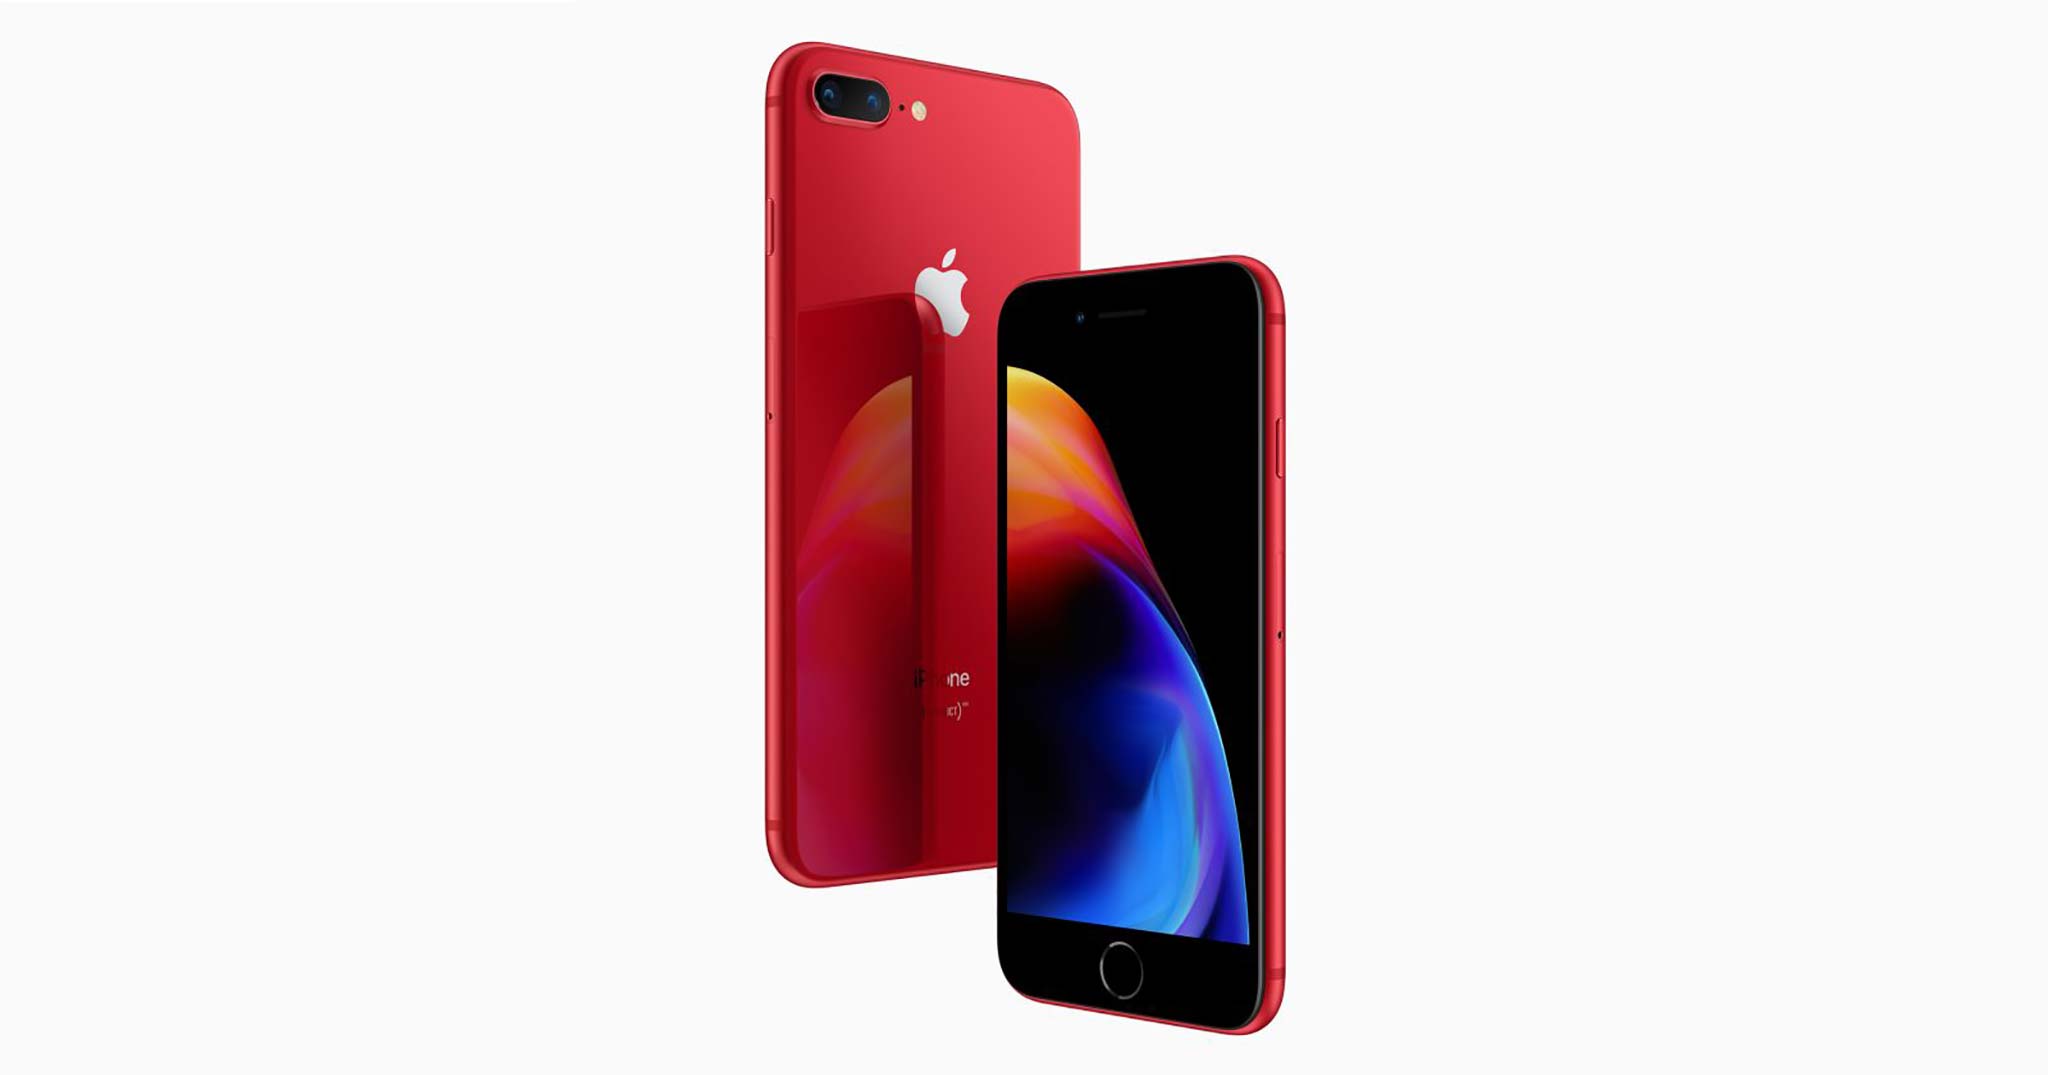 iphone8-iphone8plus-product-red_front-back_041018.jpg